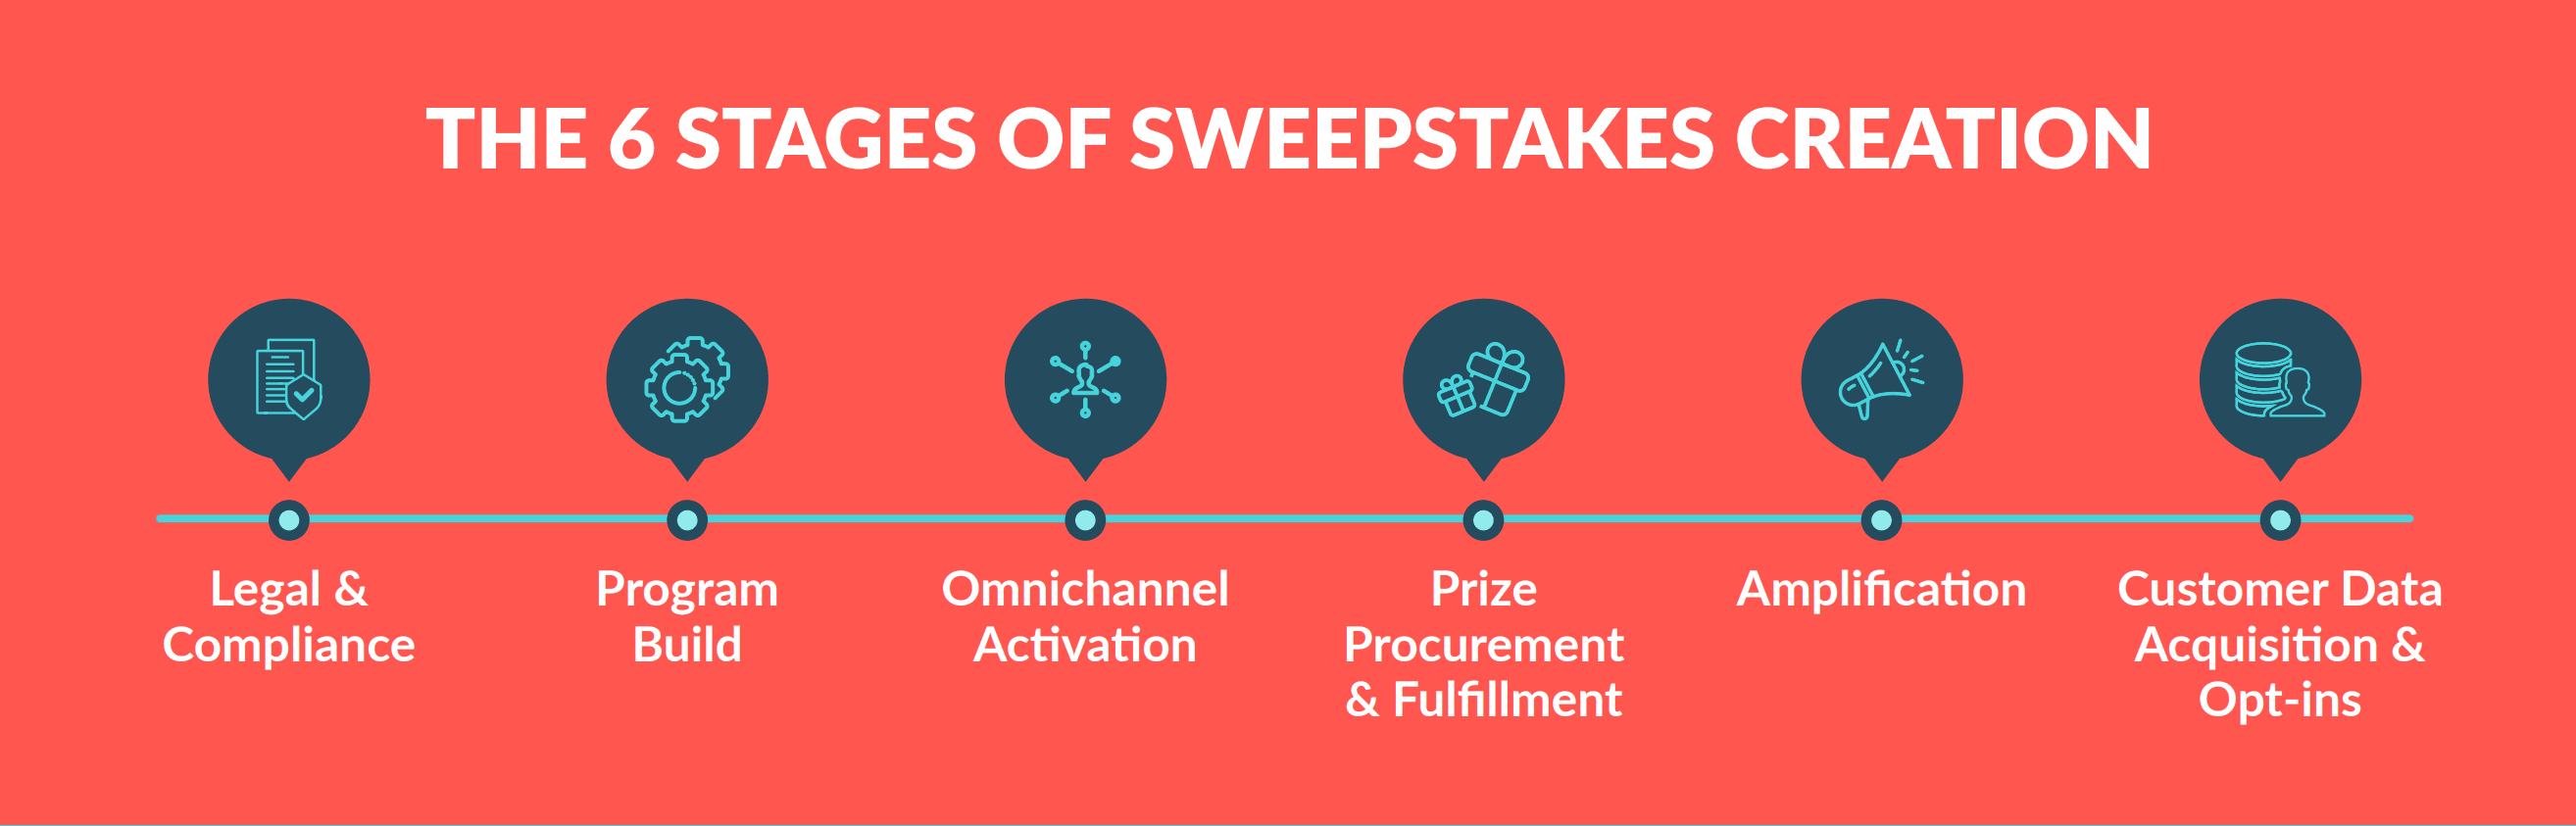 A diagram showing the six stages of sweepstakes creation: legal, build, activation, prize procurement and fulfillment, amplification, and data analysis